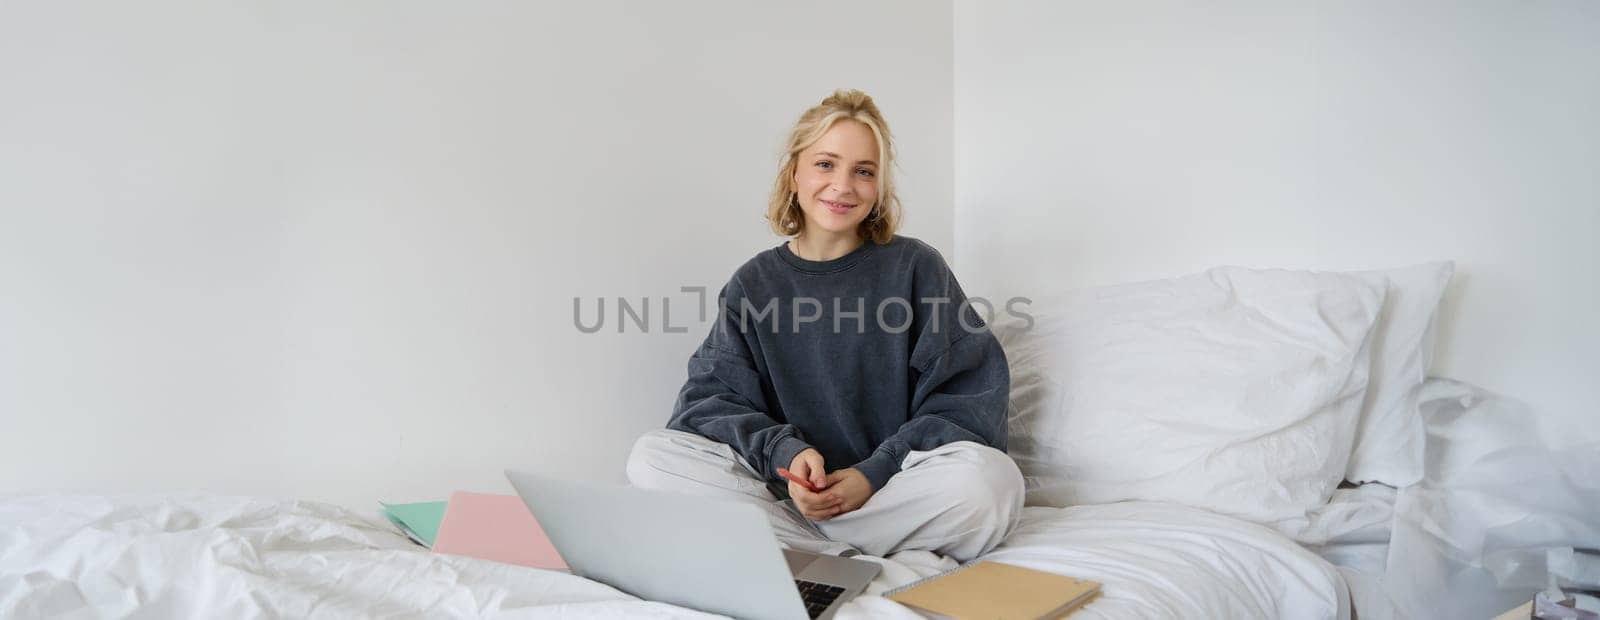 Portrait of female student, woman sits on bed with laptop and notebooks, studying online, remote education concept. Girl freelancer working from her bedroom.